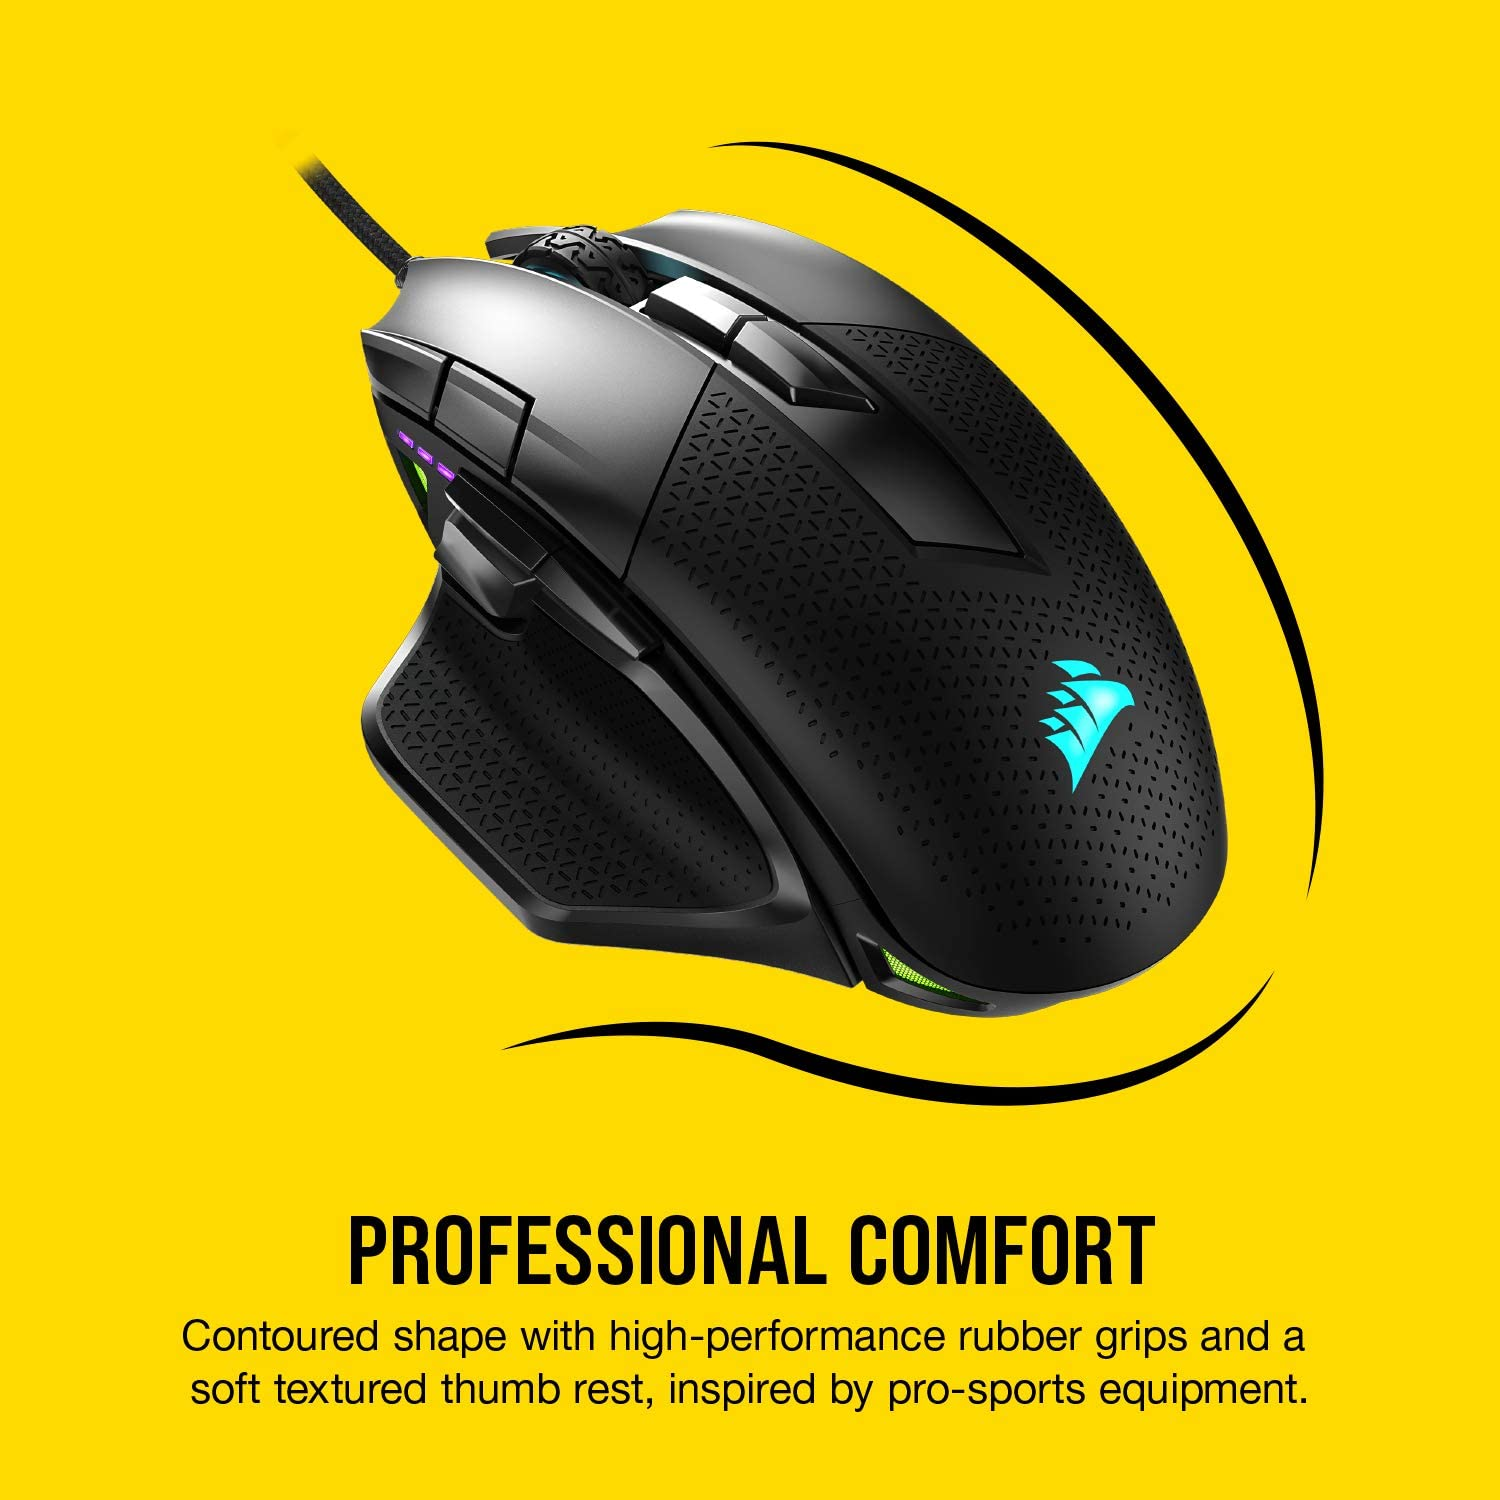 An ergonomic gaming mouse is designed to support the whole hand for optimal comfort while gaming. 